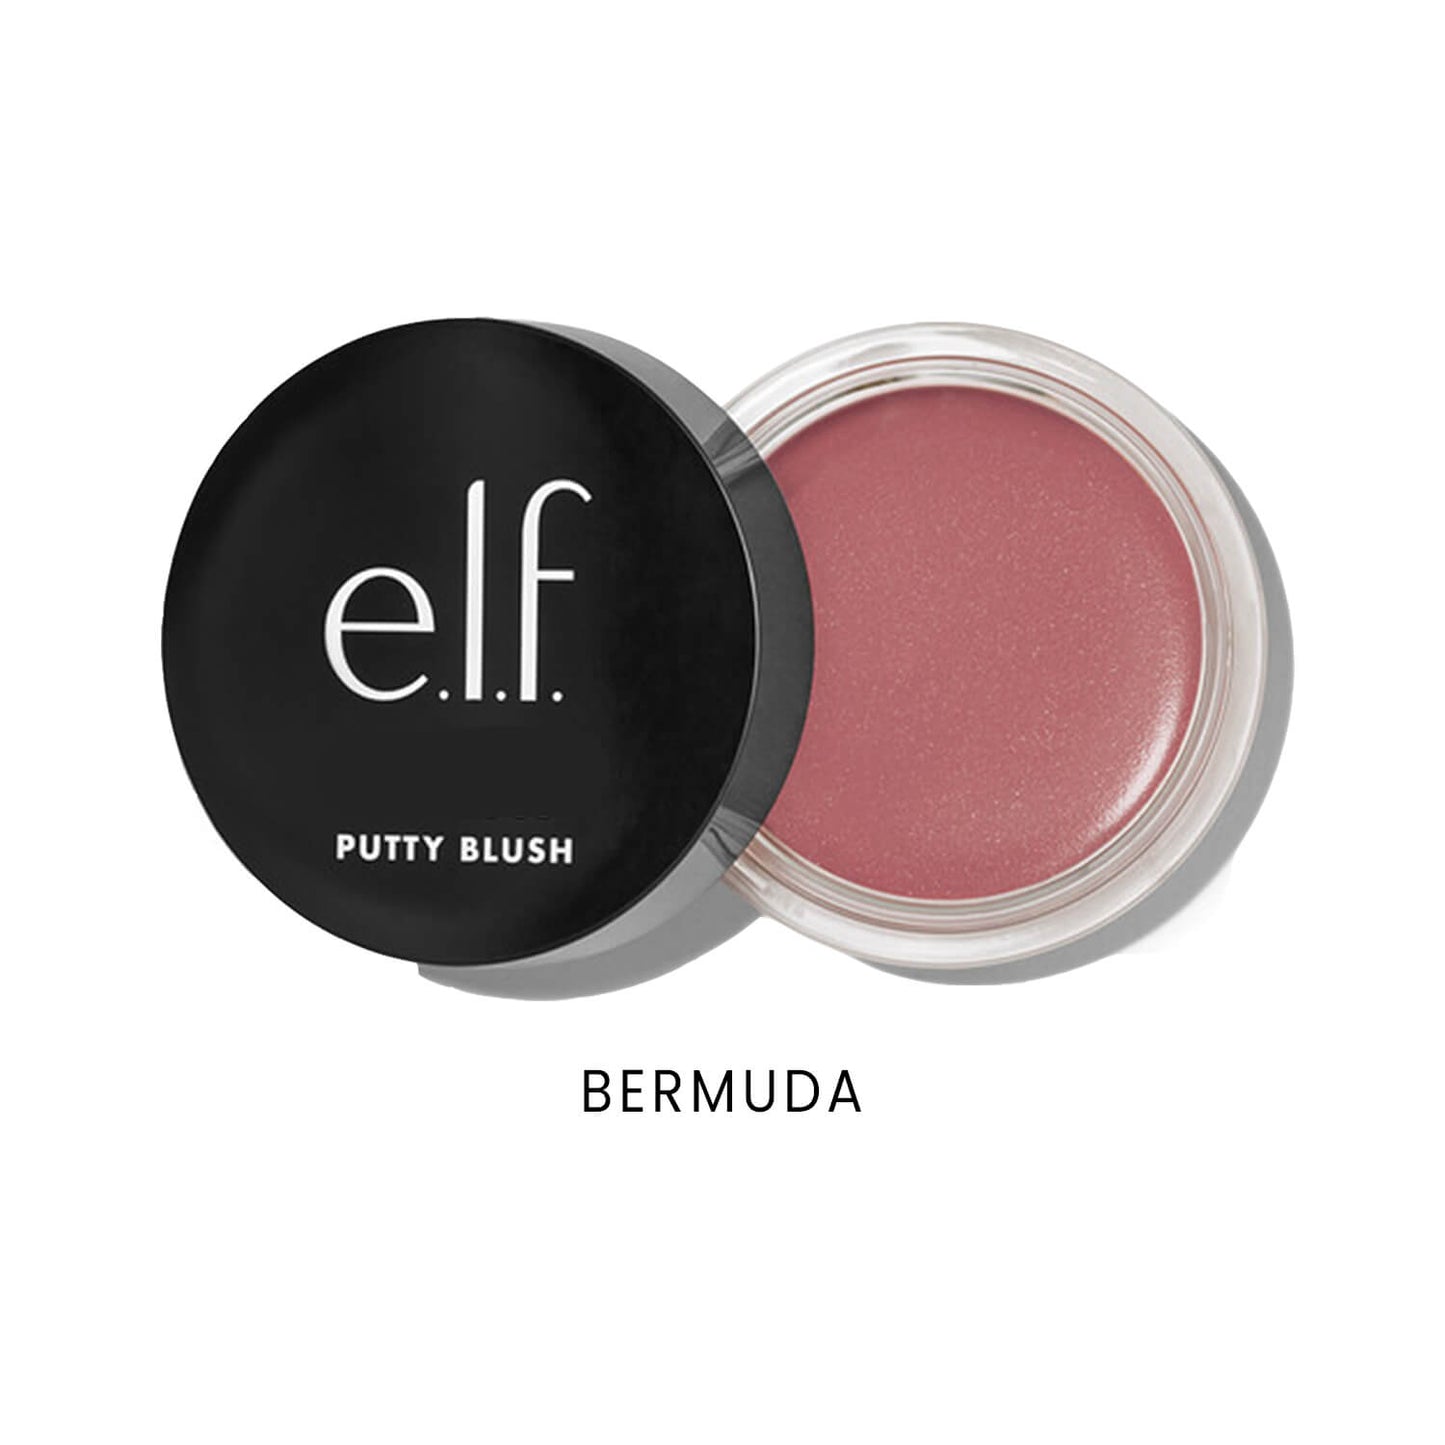 Shop elf putty blush in bermuda shade available at Heygirl.pk for delivery in Pakistan